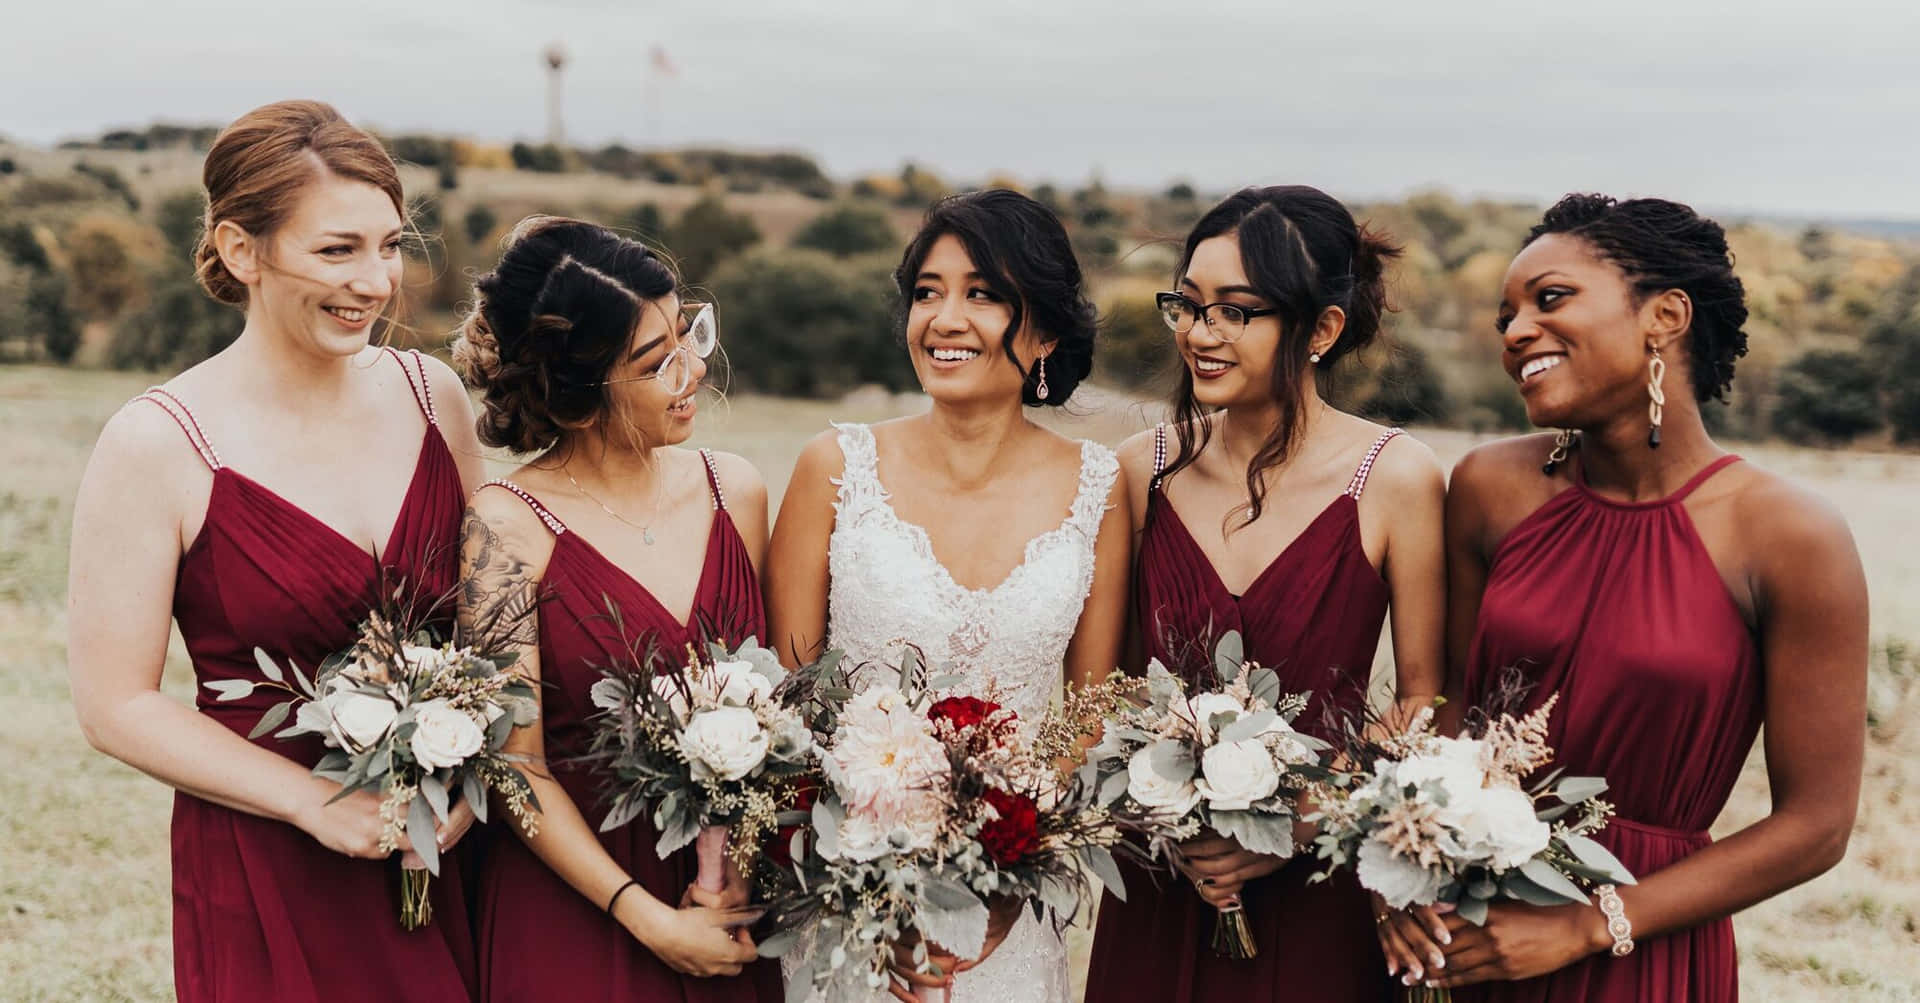 Bride With Bridesmaids Wearing Maroon Dresses Picture